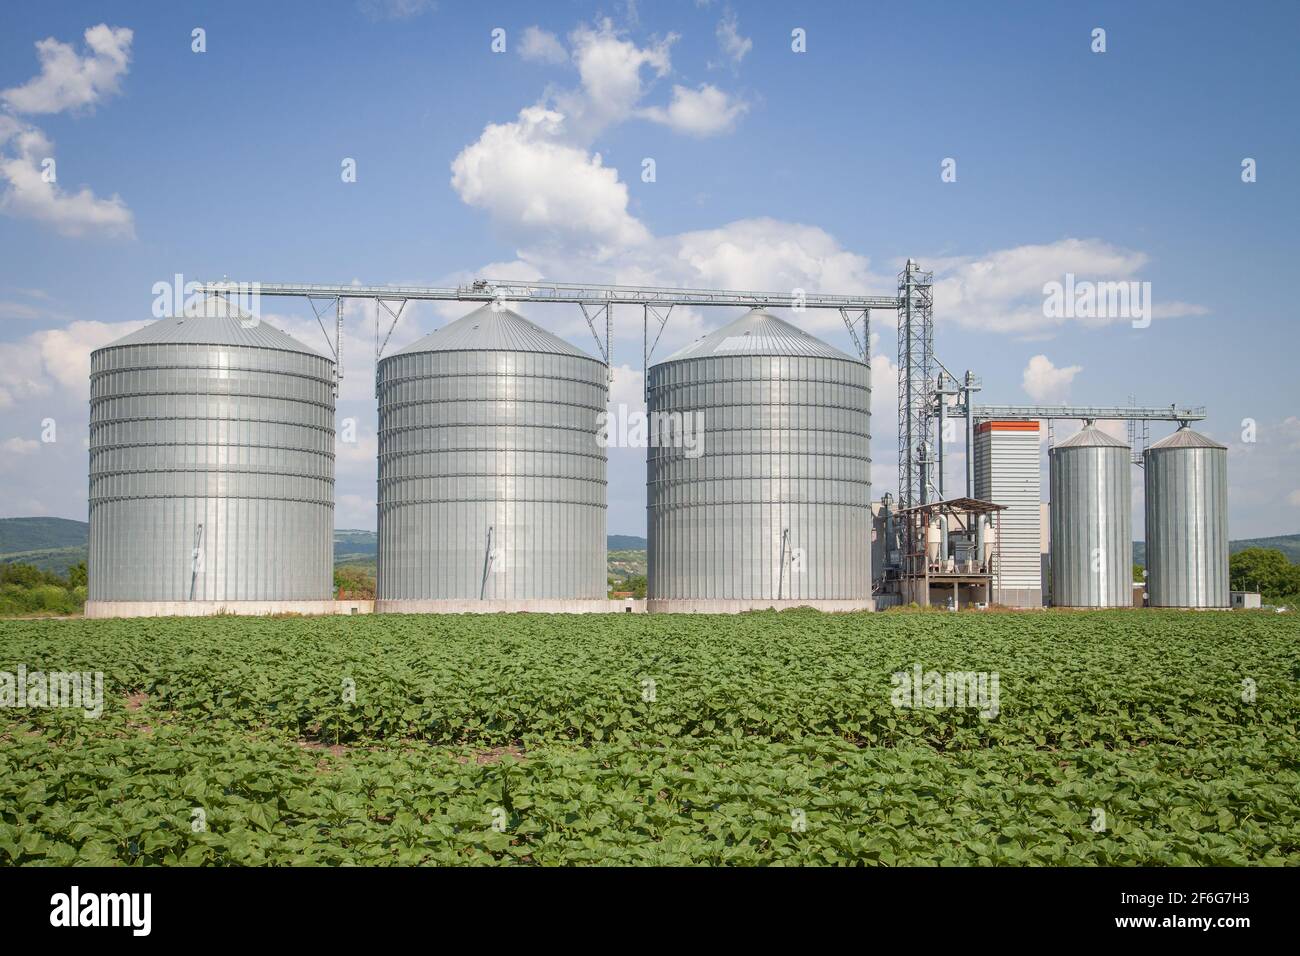 Agricultural Silo - Building Exterior, Storage and drying of grains, wheat, corn, soy, sunflower against the blue sky with white clouds Stock Photo